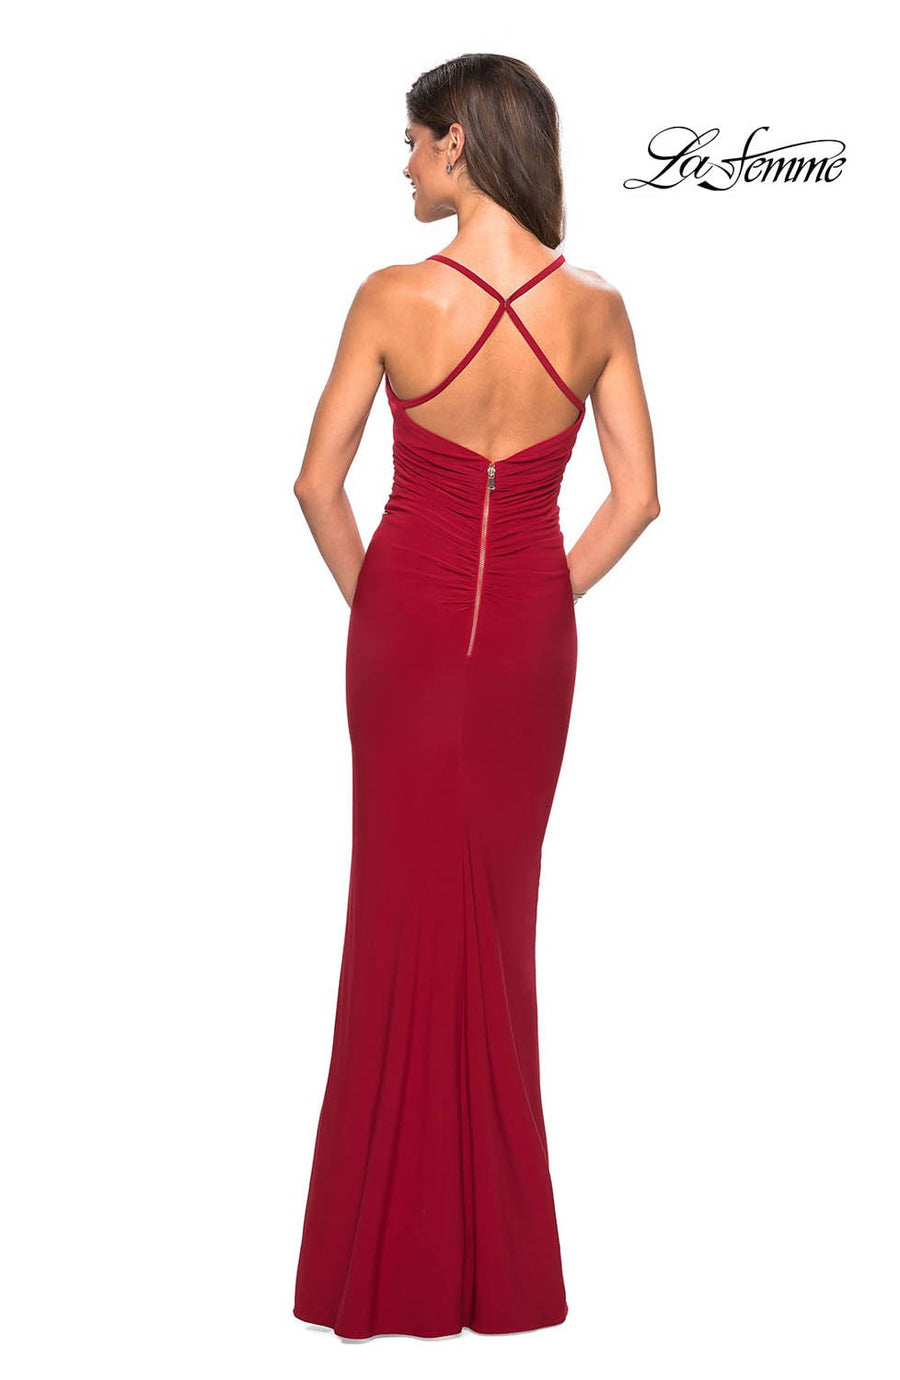 La Femme 27622 prom dress images.  La Femme 27622 is available in these colors: Black, Forest Green, Gunmetal, Red, Royal Blue.